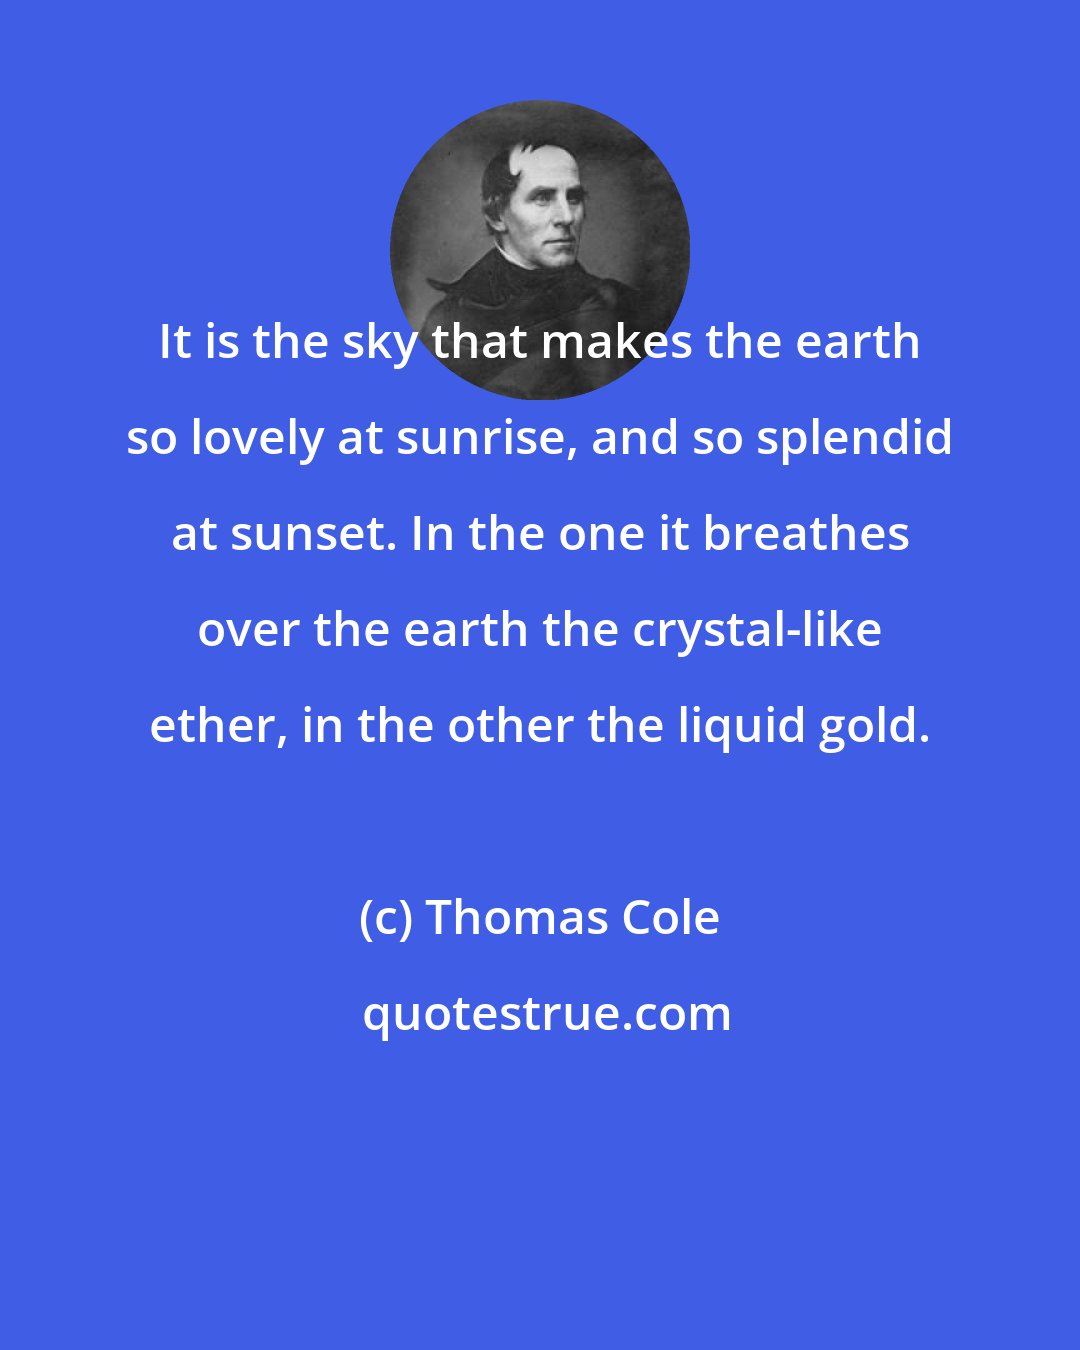 Thomas Cole: It is the sky that makes the earth so lovely at sunrise, and so splendid at sunset. In the one it breathes over the earth the crystal-like ether, in the other the liquid gold.